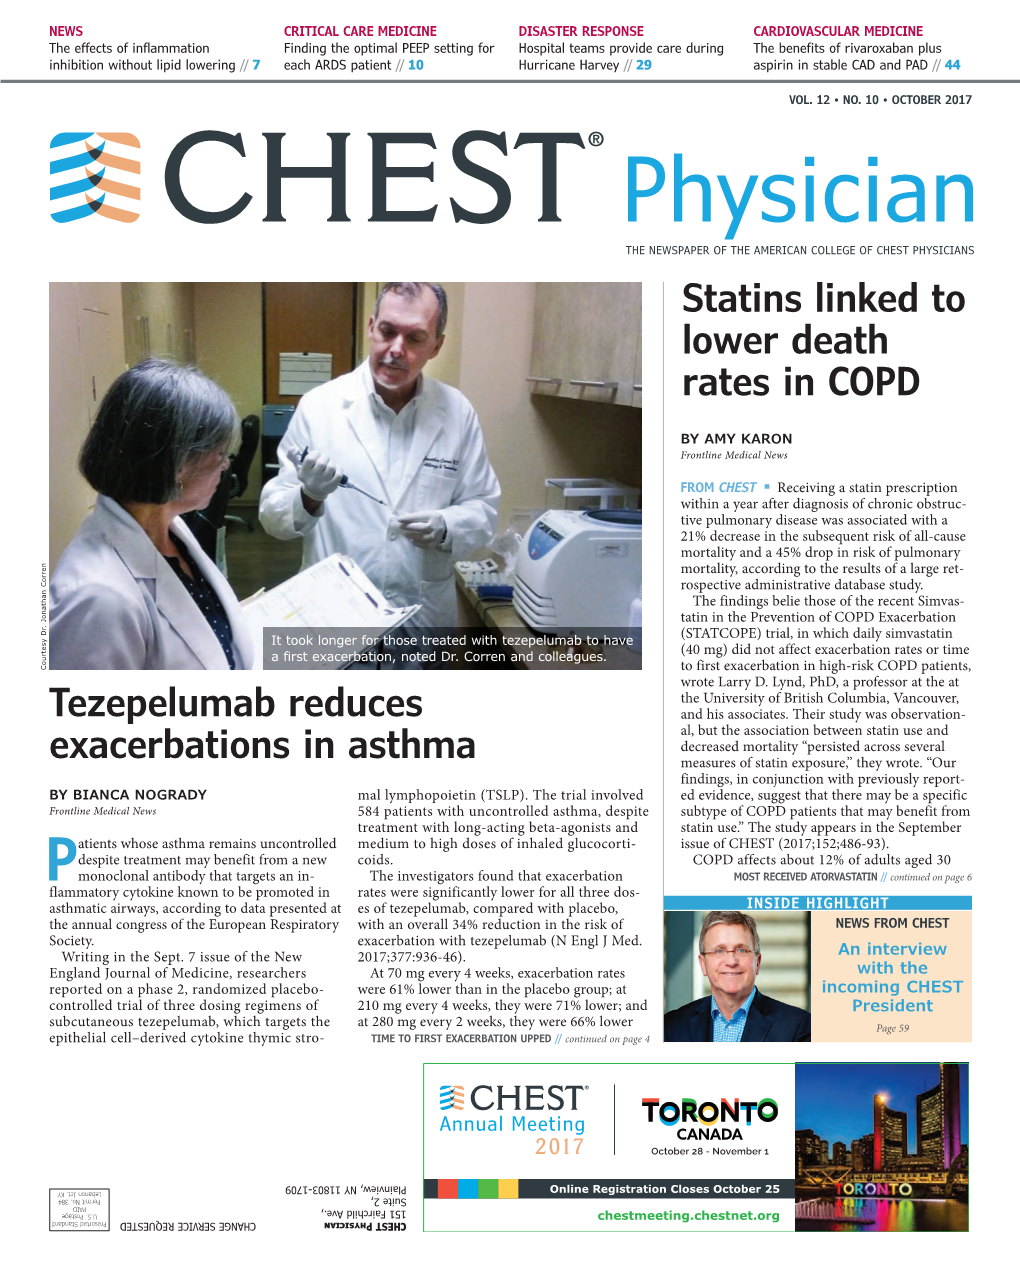 Statins Linked to Lower Death Rates in COPD Tezepelumab Reduces